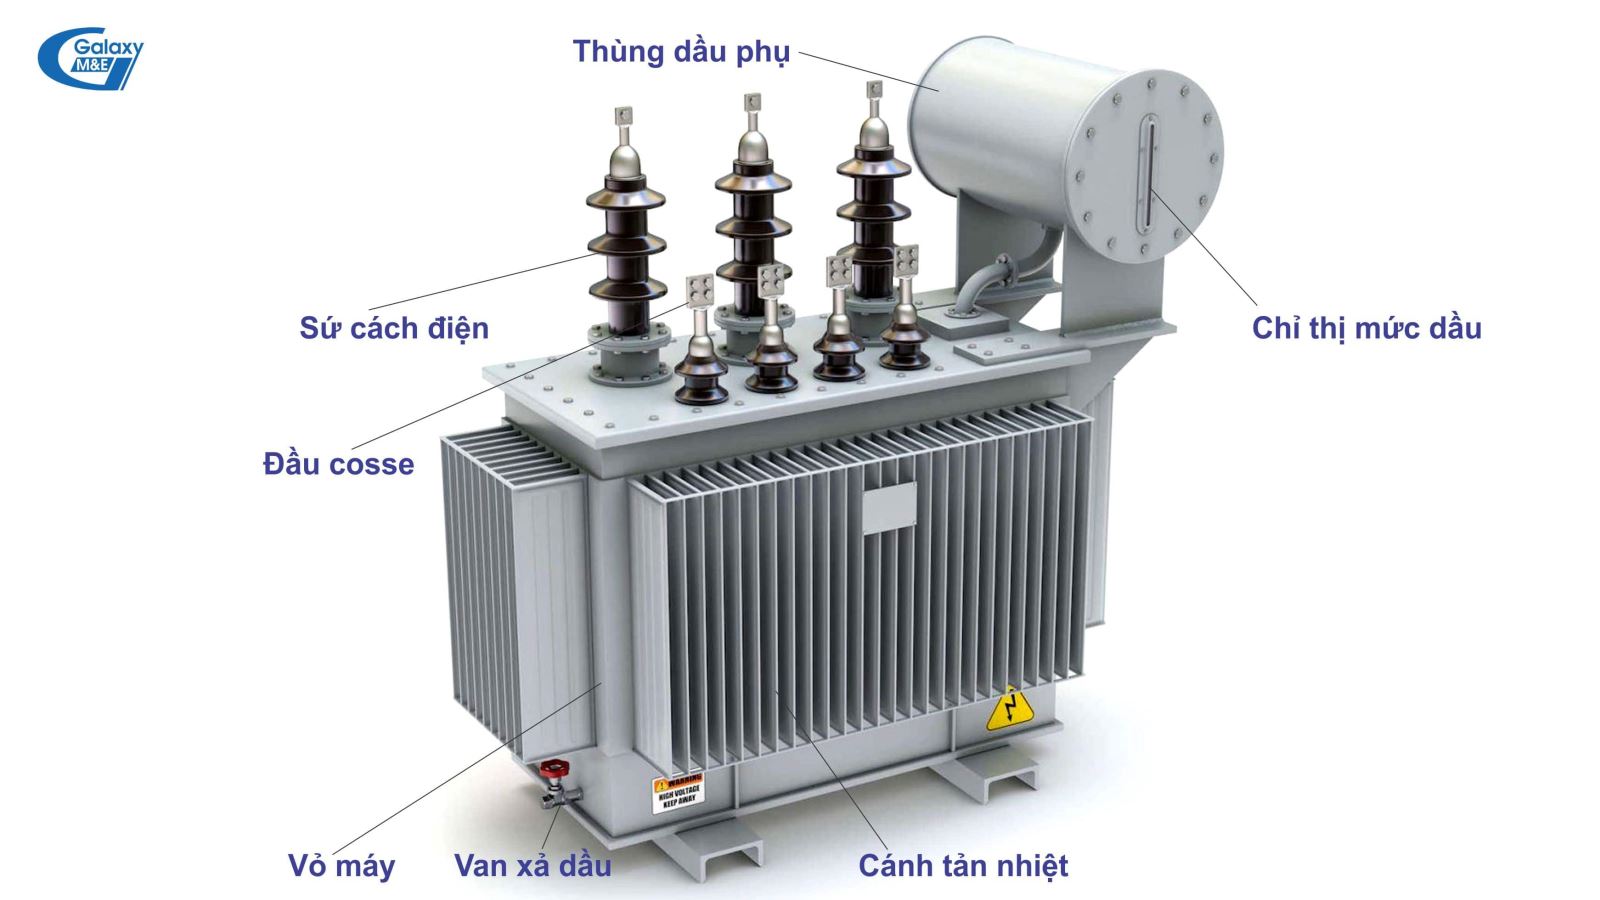 Typical design of a 3-phase open-type transformer.